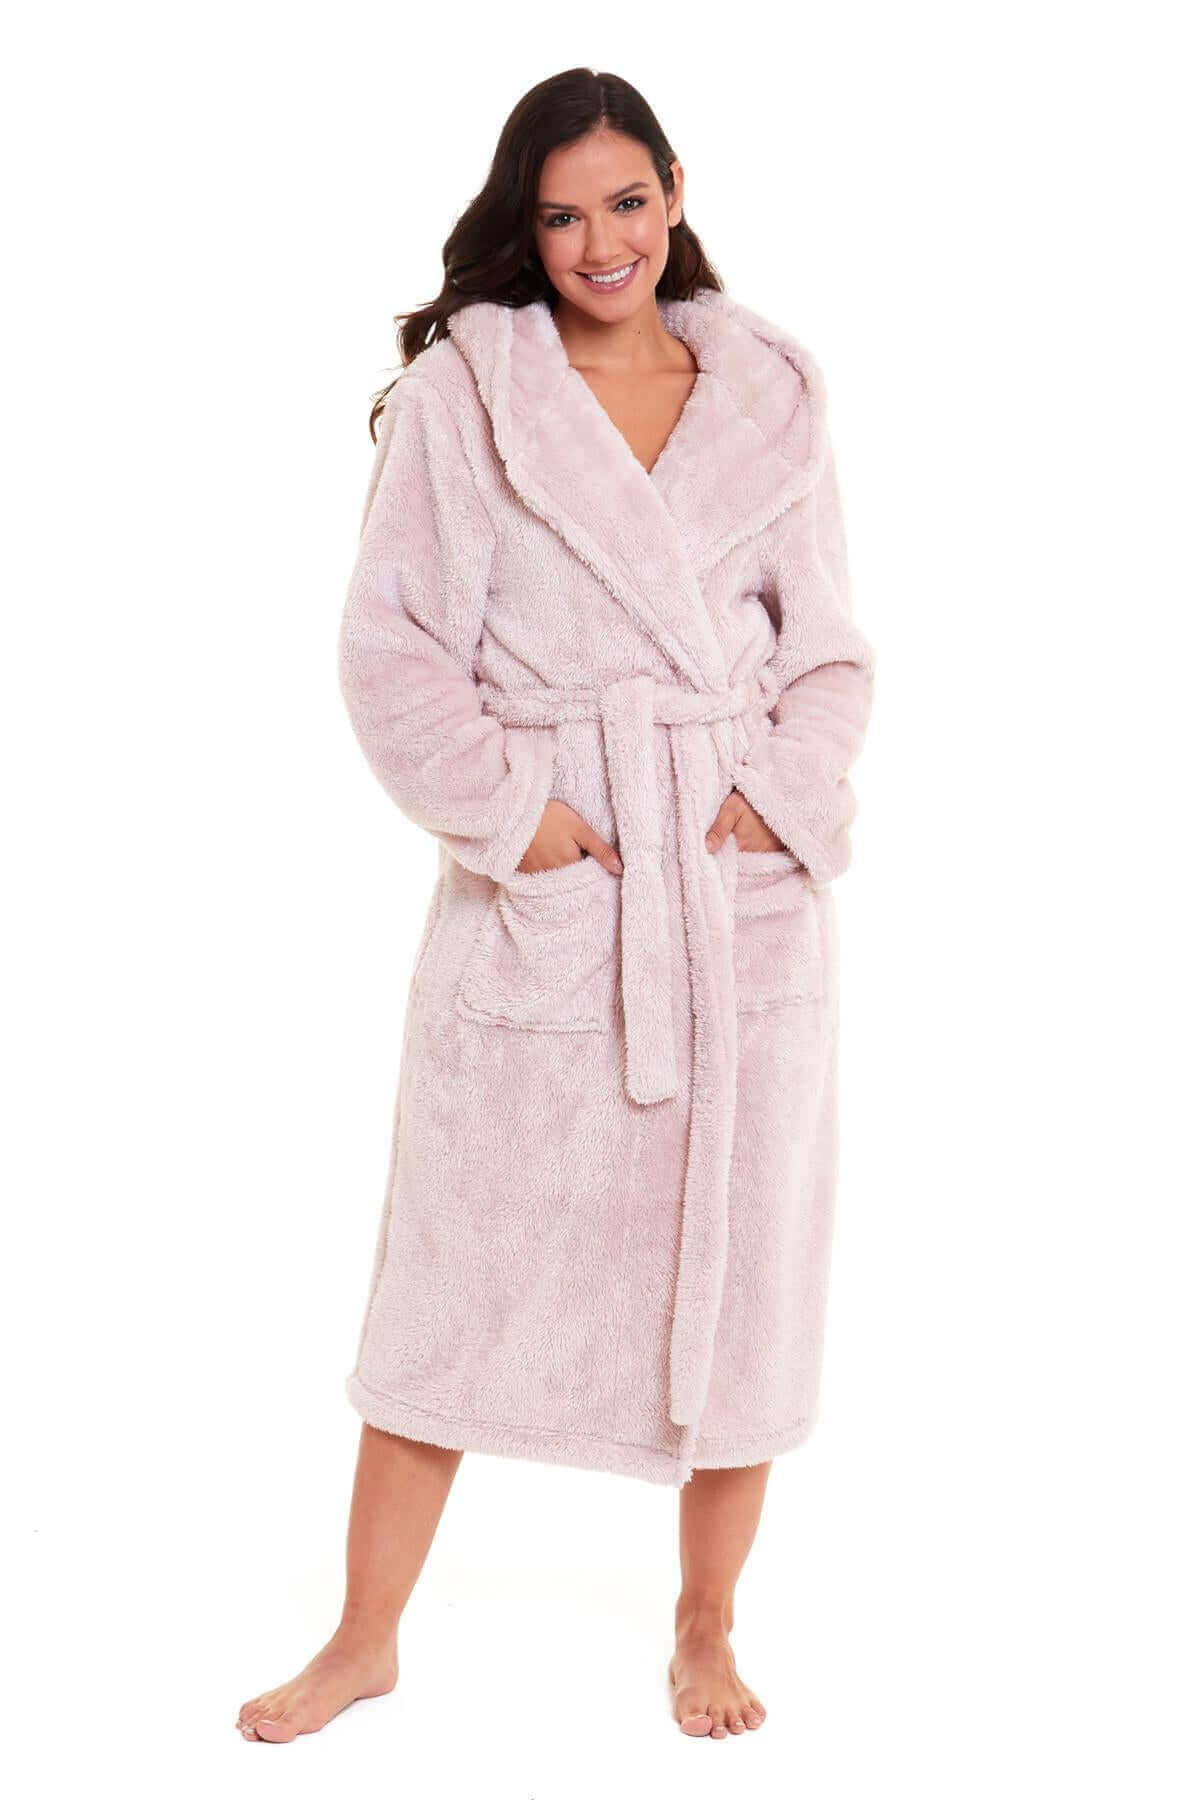 JIAHENGY Ladies Winter Fleece Dressing Gown，Thicken and lengthen night gowns,  autumn and winter bathrobes, warm bathrobes and home wear-Grey female_L  (clothing length; 130CM) : Amazon.co.uk: Fashion